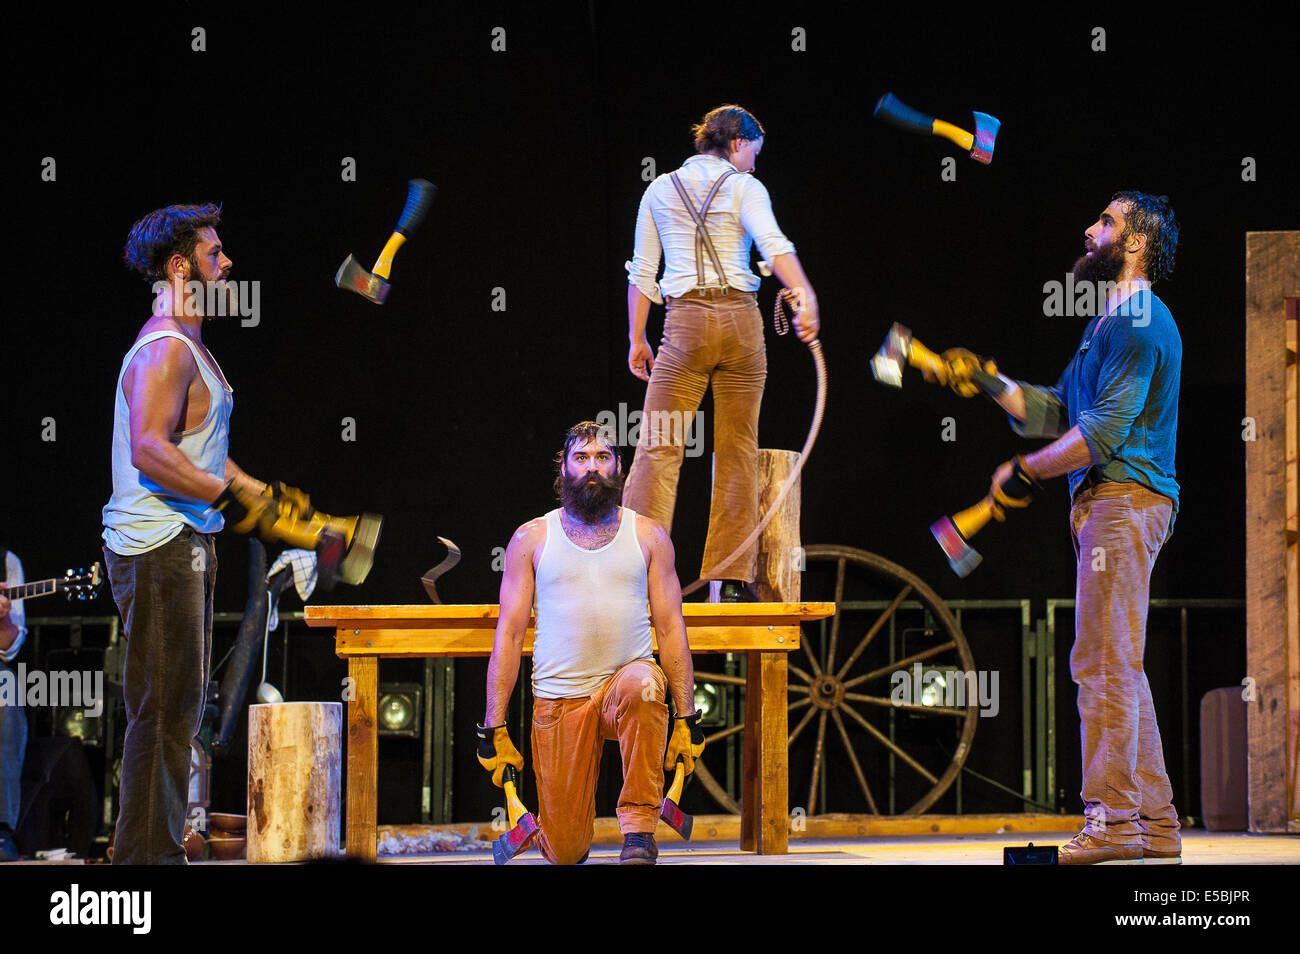 Piedmont, Province Of Turin, Italy. 25th July, 2014. Grugliasco Le Serre Performance 'Timber' By Canadian Company Cirque Alfonse Credit:  Realy Easy Star/Alamy Live News Stock Photo